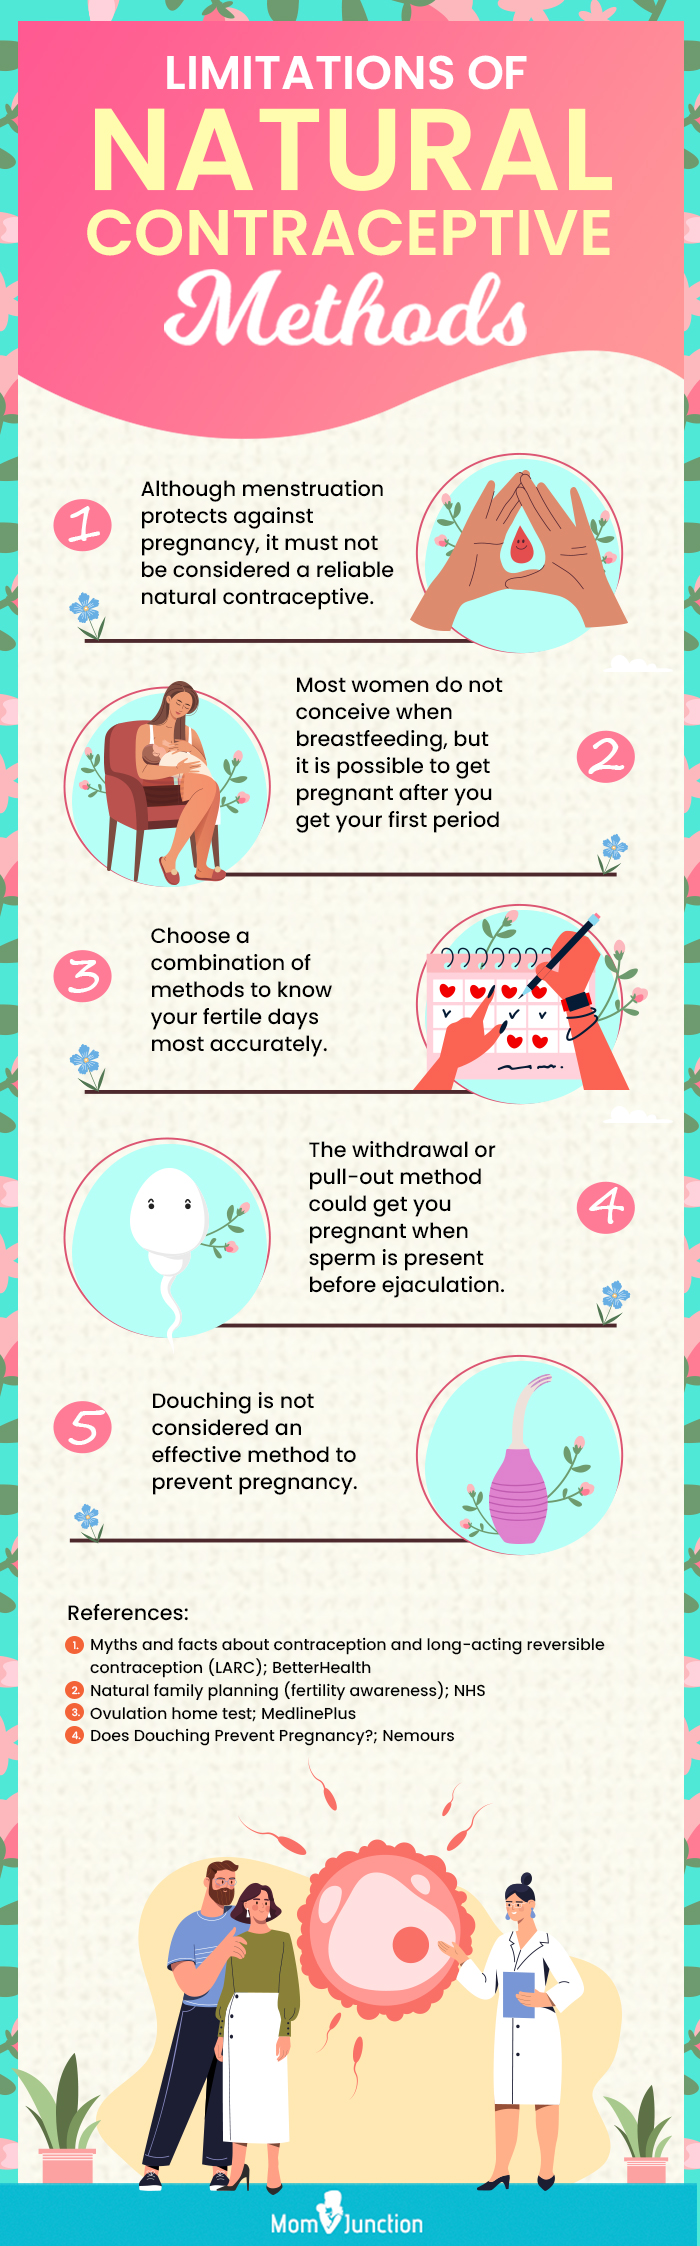 limitations of natural contraceptive methods (infographic)